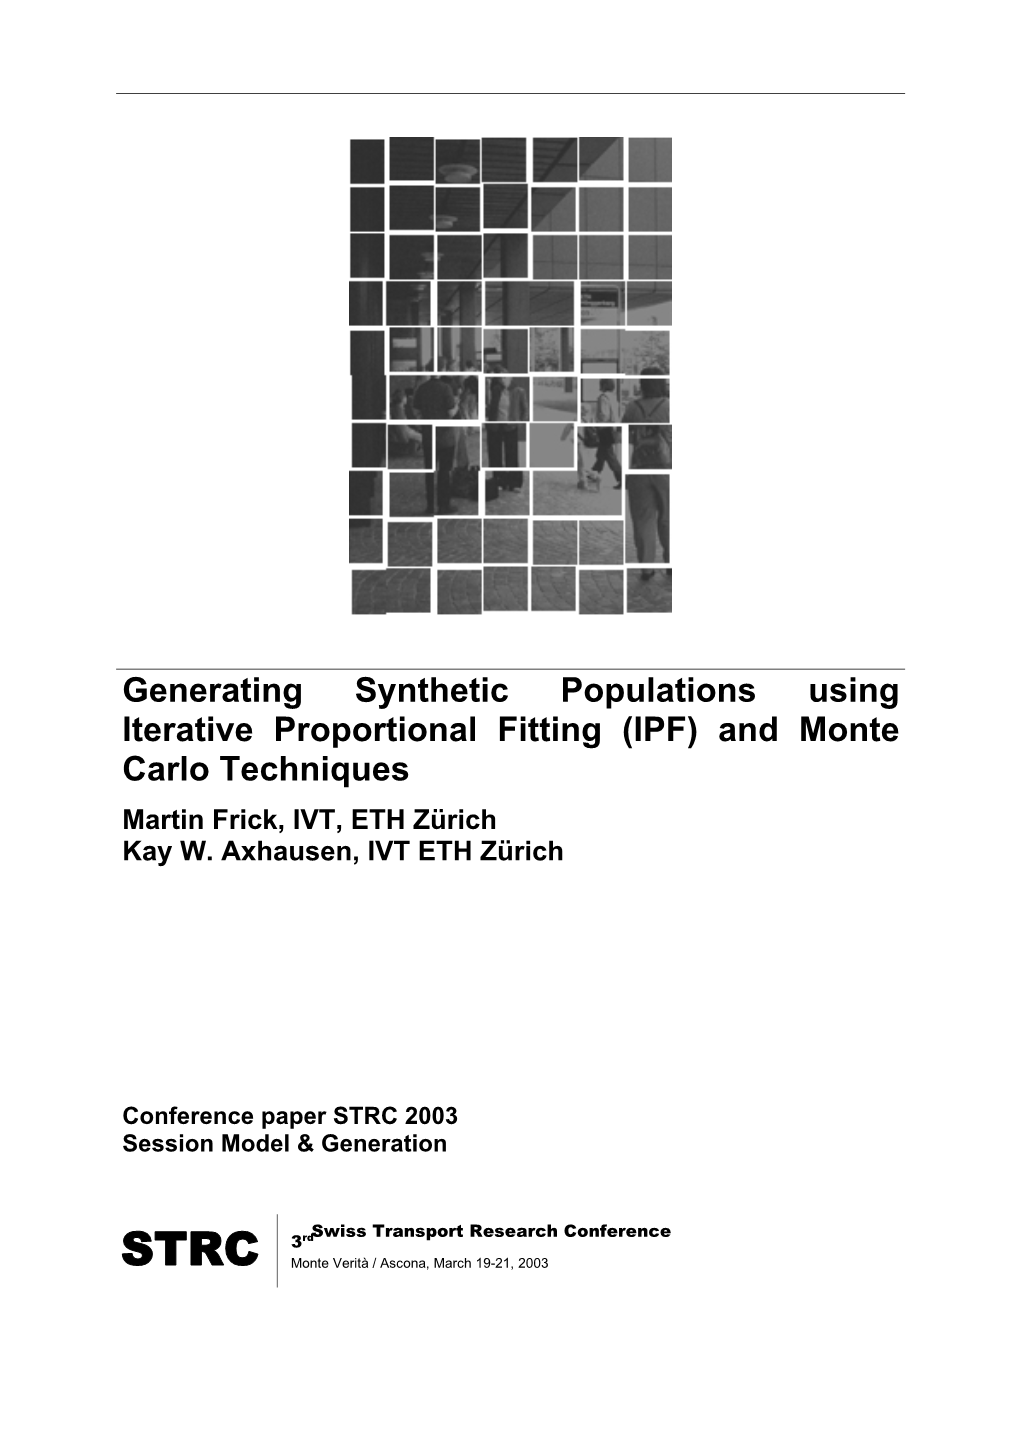 Generating Synthetic Populations Using Iterative Proportional Fitting (IPF) and Monte Carlo Techniques Martin Frick, IVT, ETH Zürich Kay W